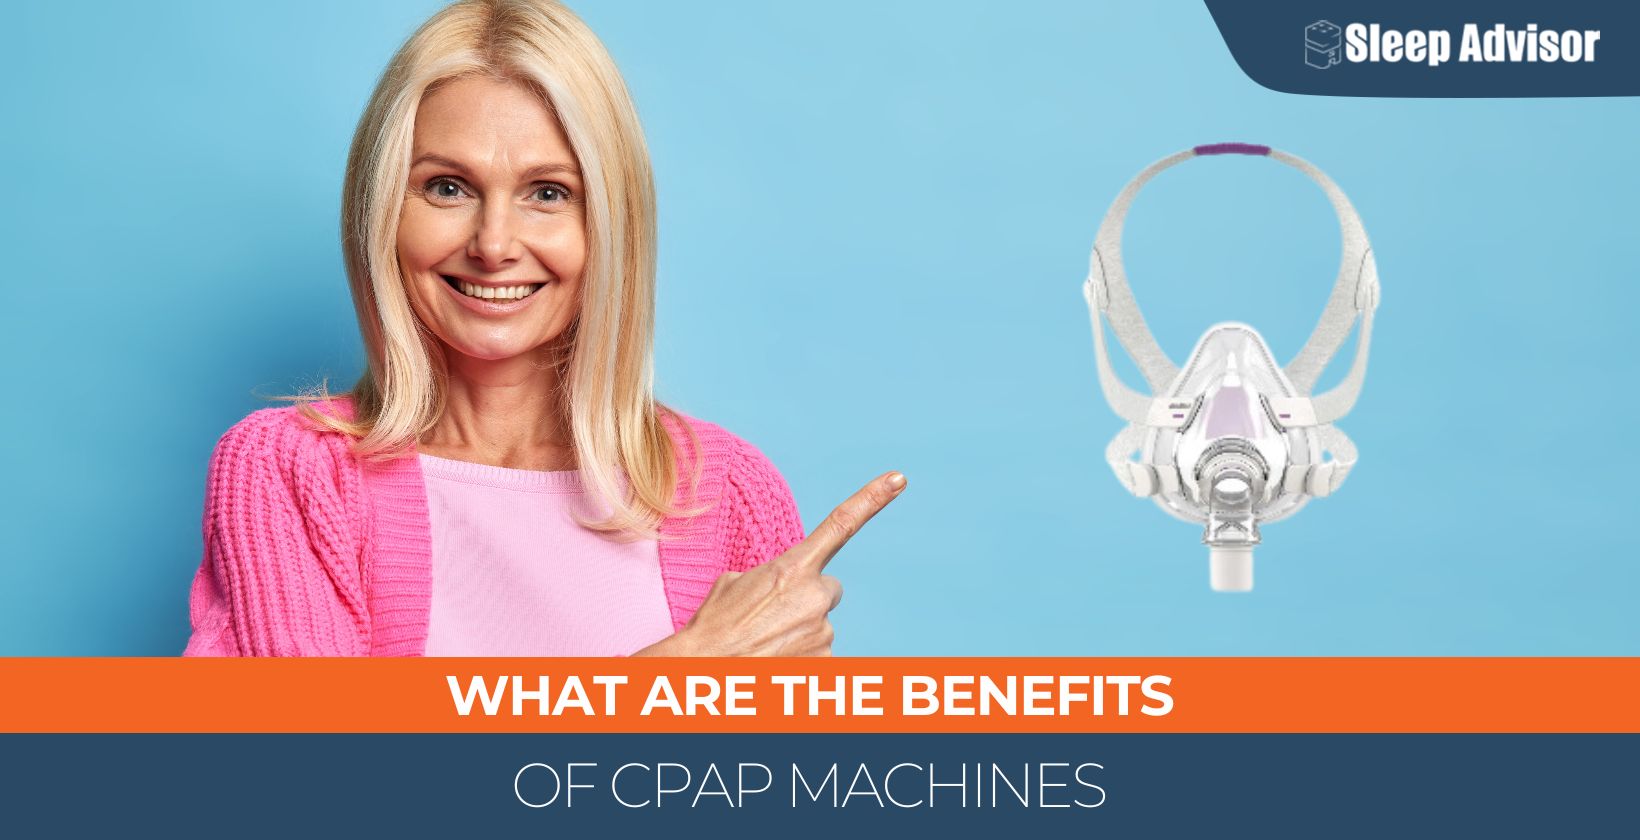 What Are the Benefits of CPAP Machines?